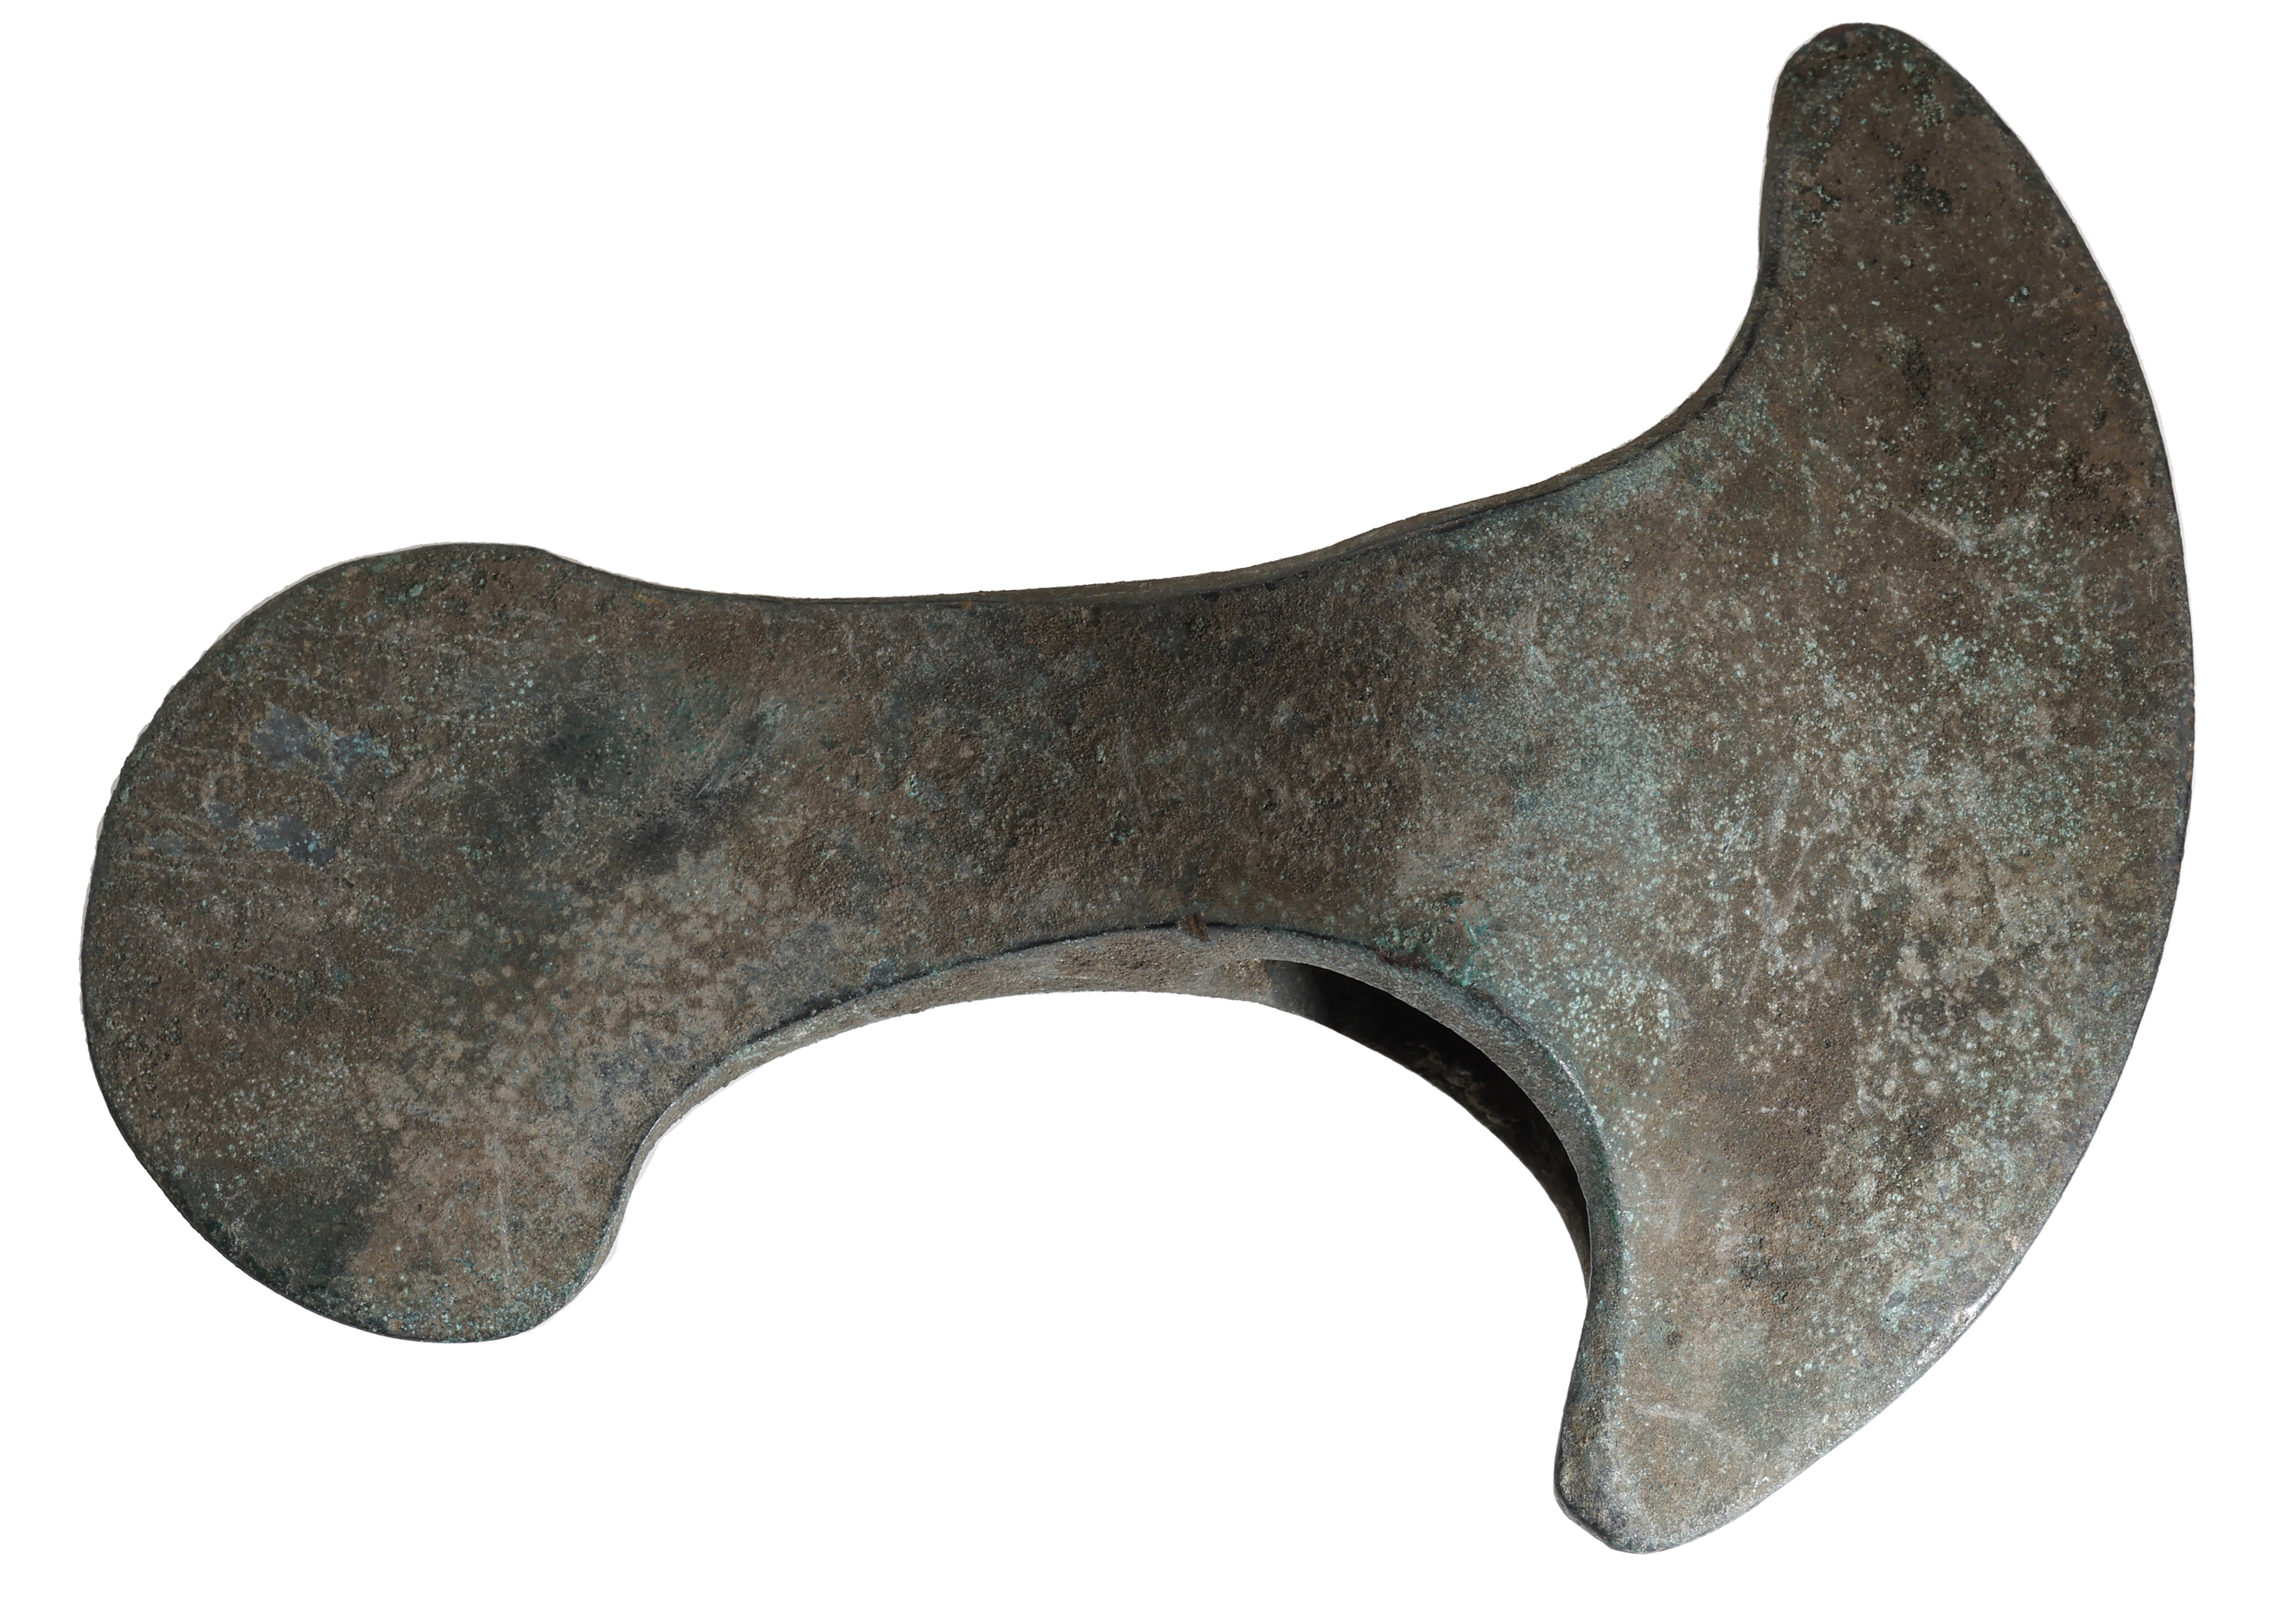 Near Eastern, bronze axe, c. 1,200 BC, 125mm x 93mm, oval sectioned shaft hole, expanded cur... - Image 2 of 4